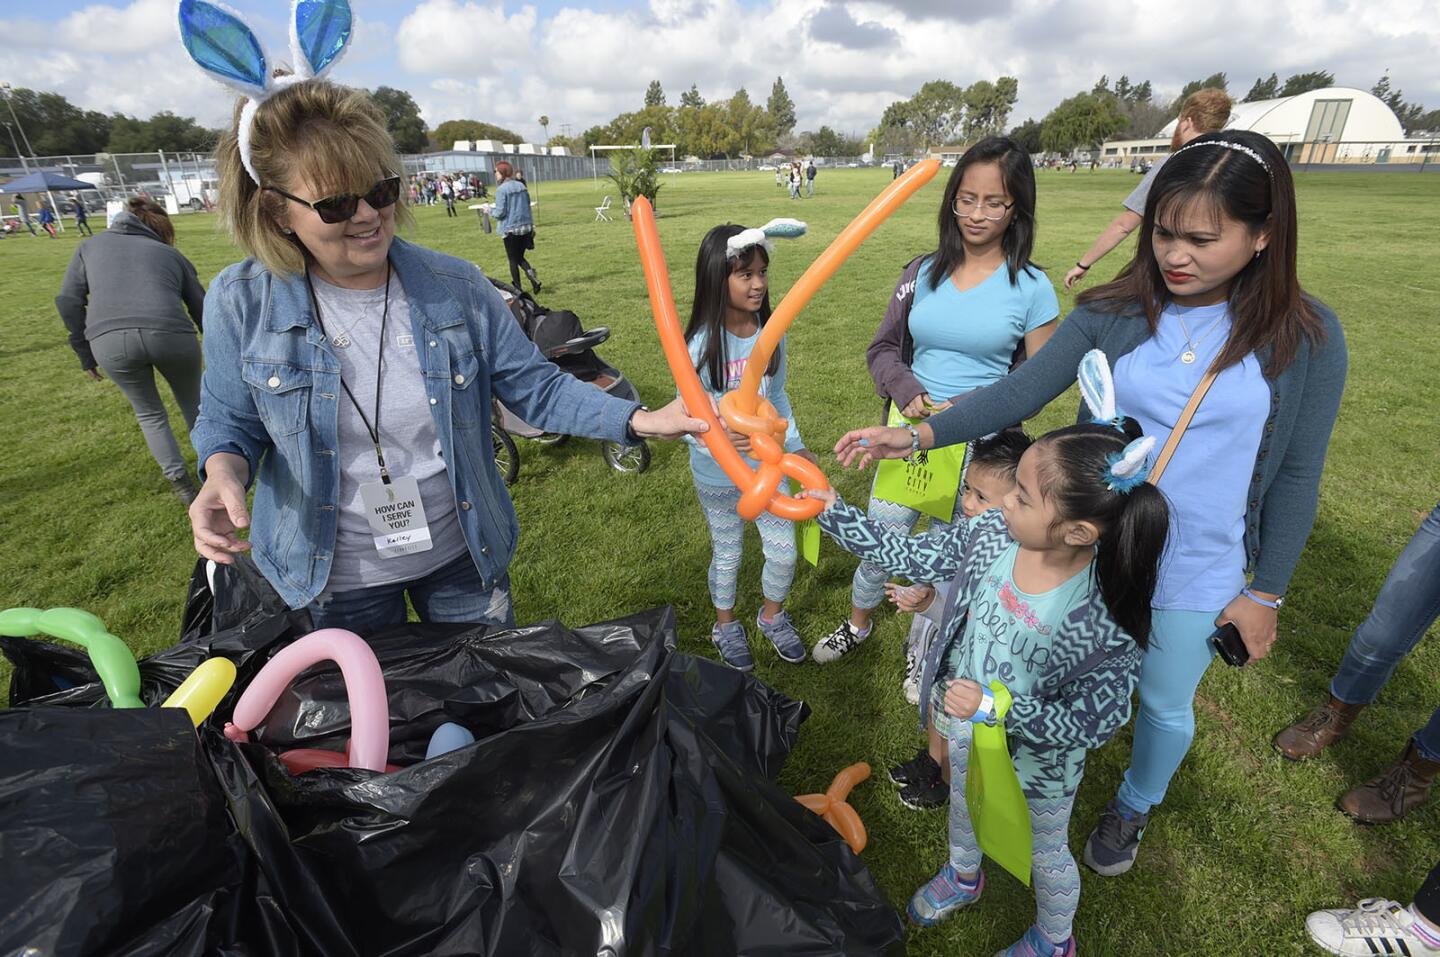 Volunteer Kelly Mize, left, hands out balloons to some of the hundreds of attendees at the 2018 Greater L.A. Easter Egg Drop hosted by Story City Church at Luther Burbank Middle School in Burbank on Saturday, March 24, 2018.